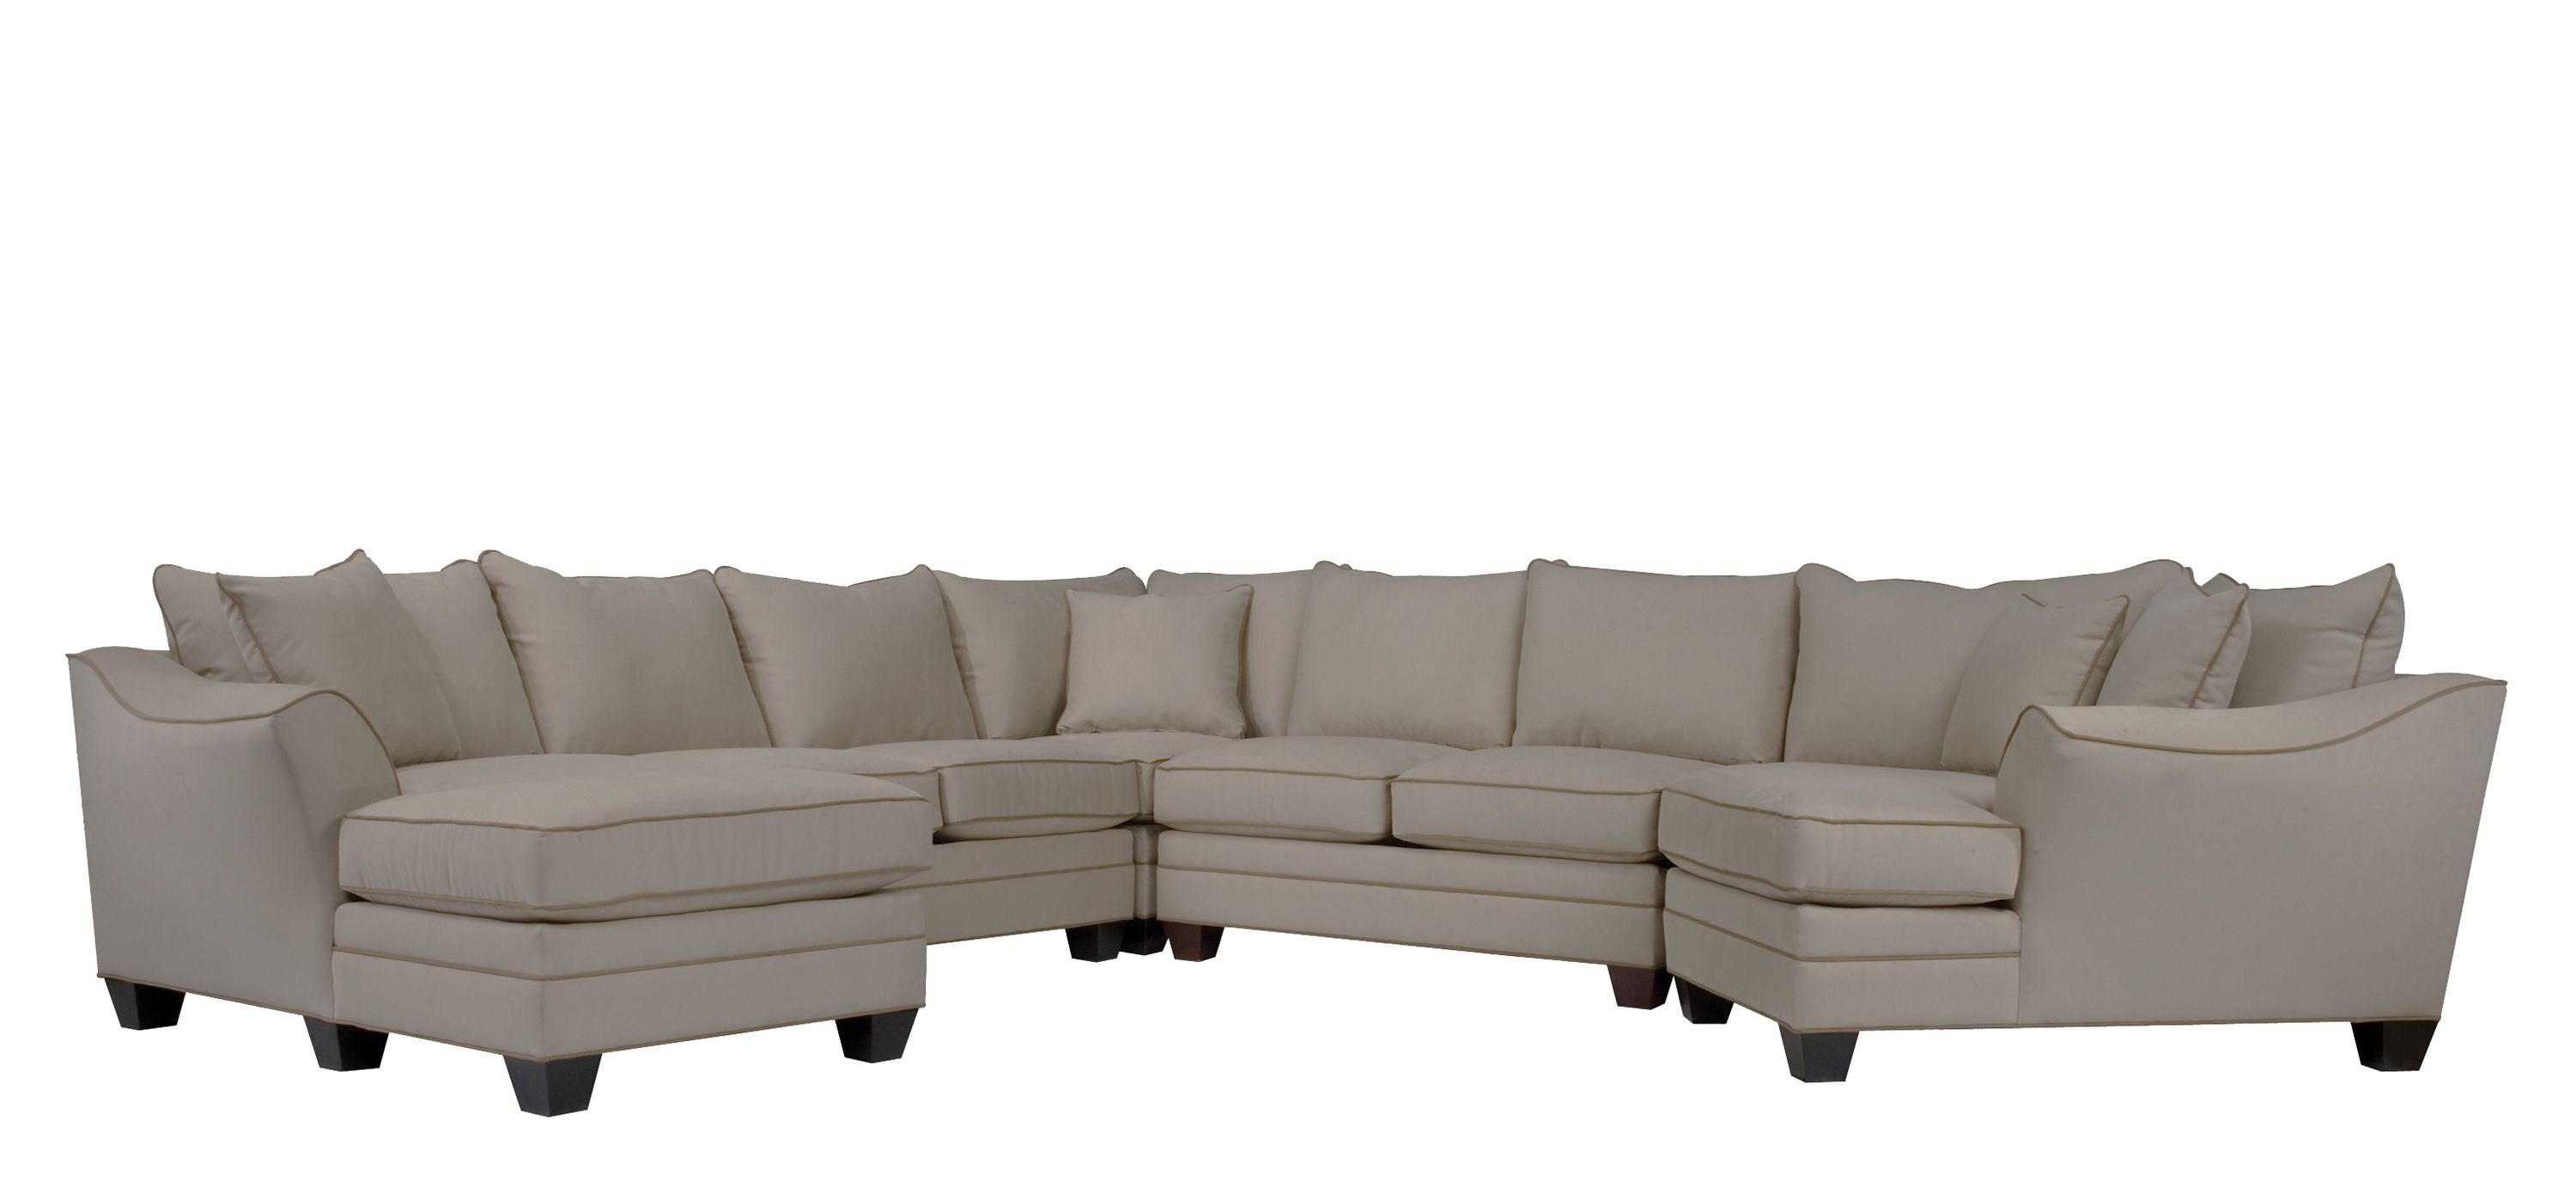 Foresthill 5-pc. Microfiber Sectional Sofa